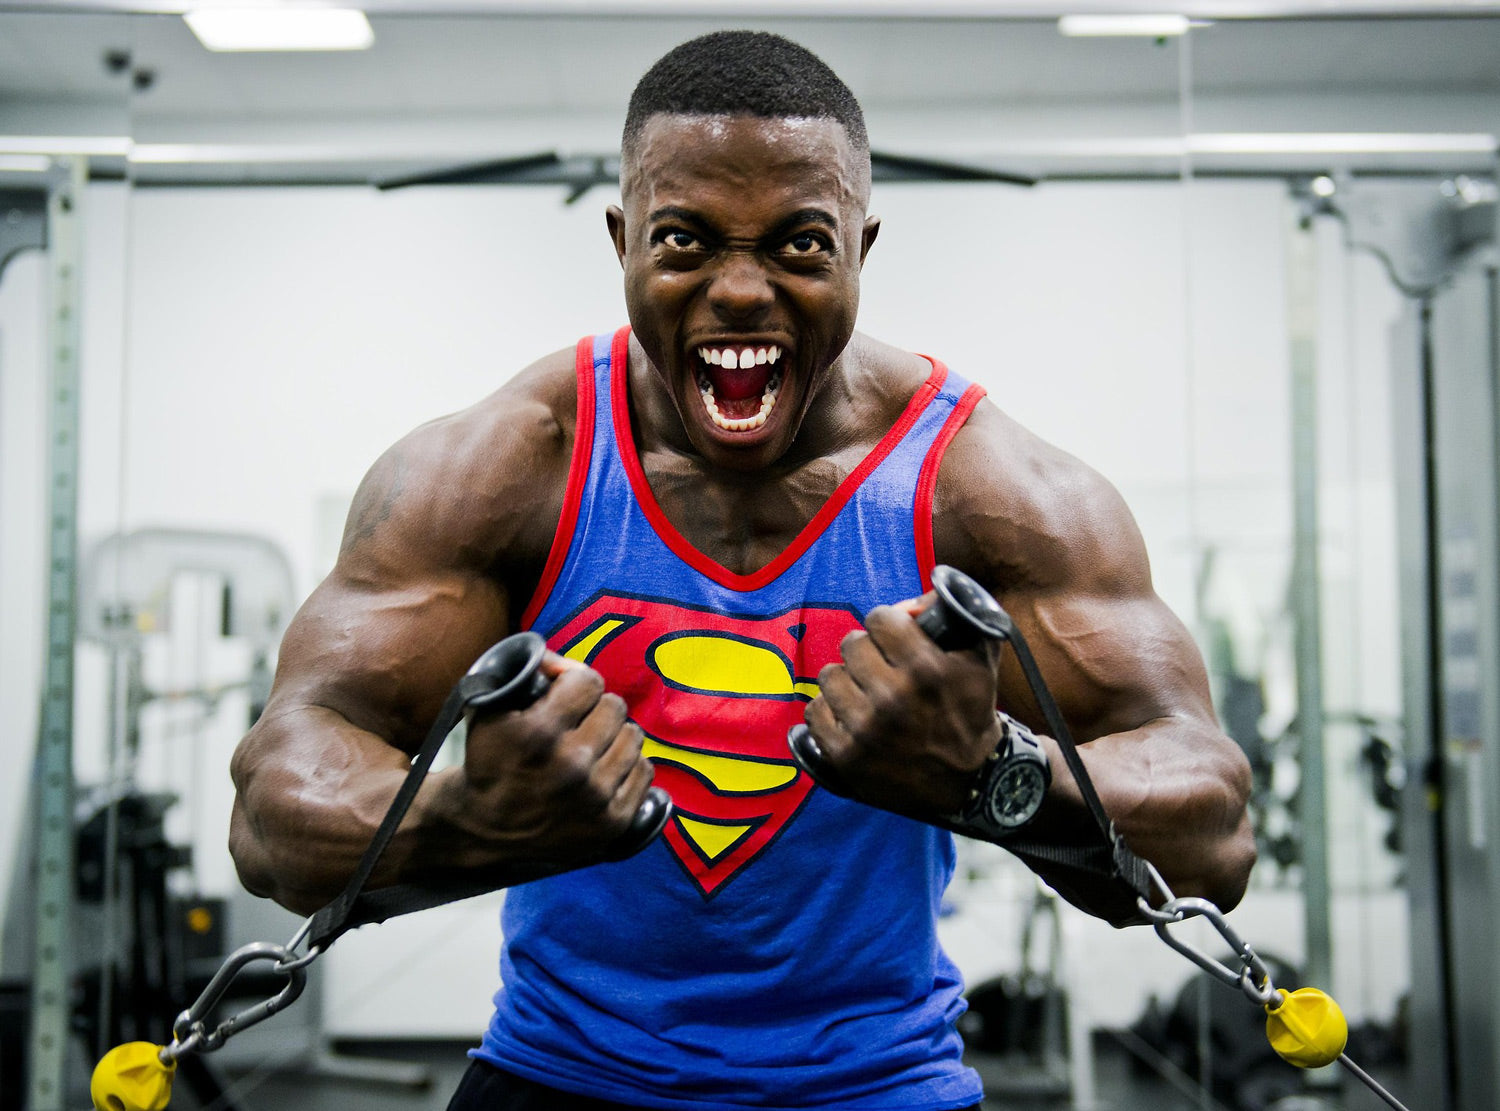 Muscular man in superman top working out